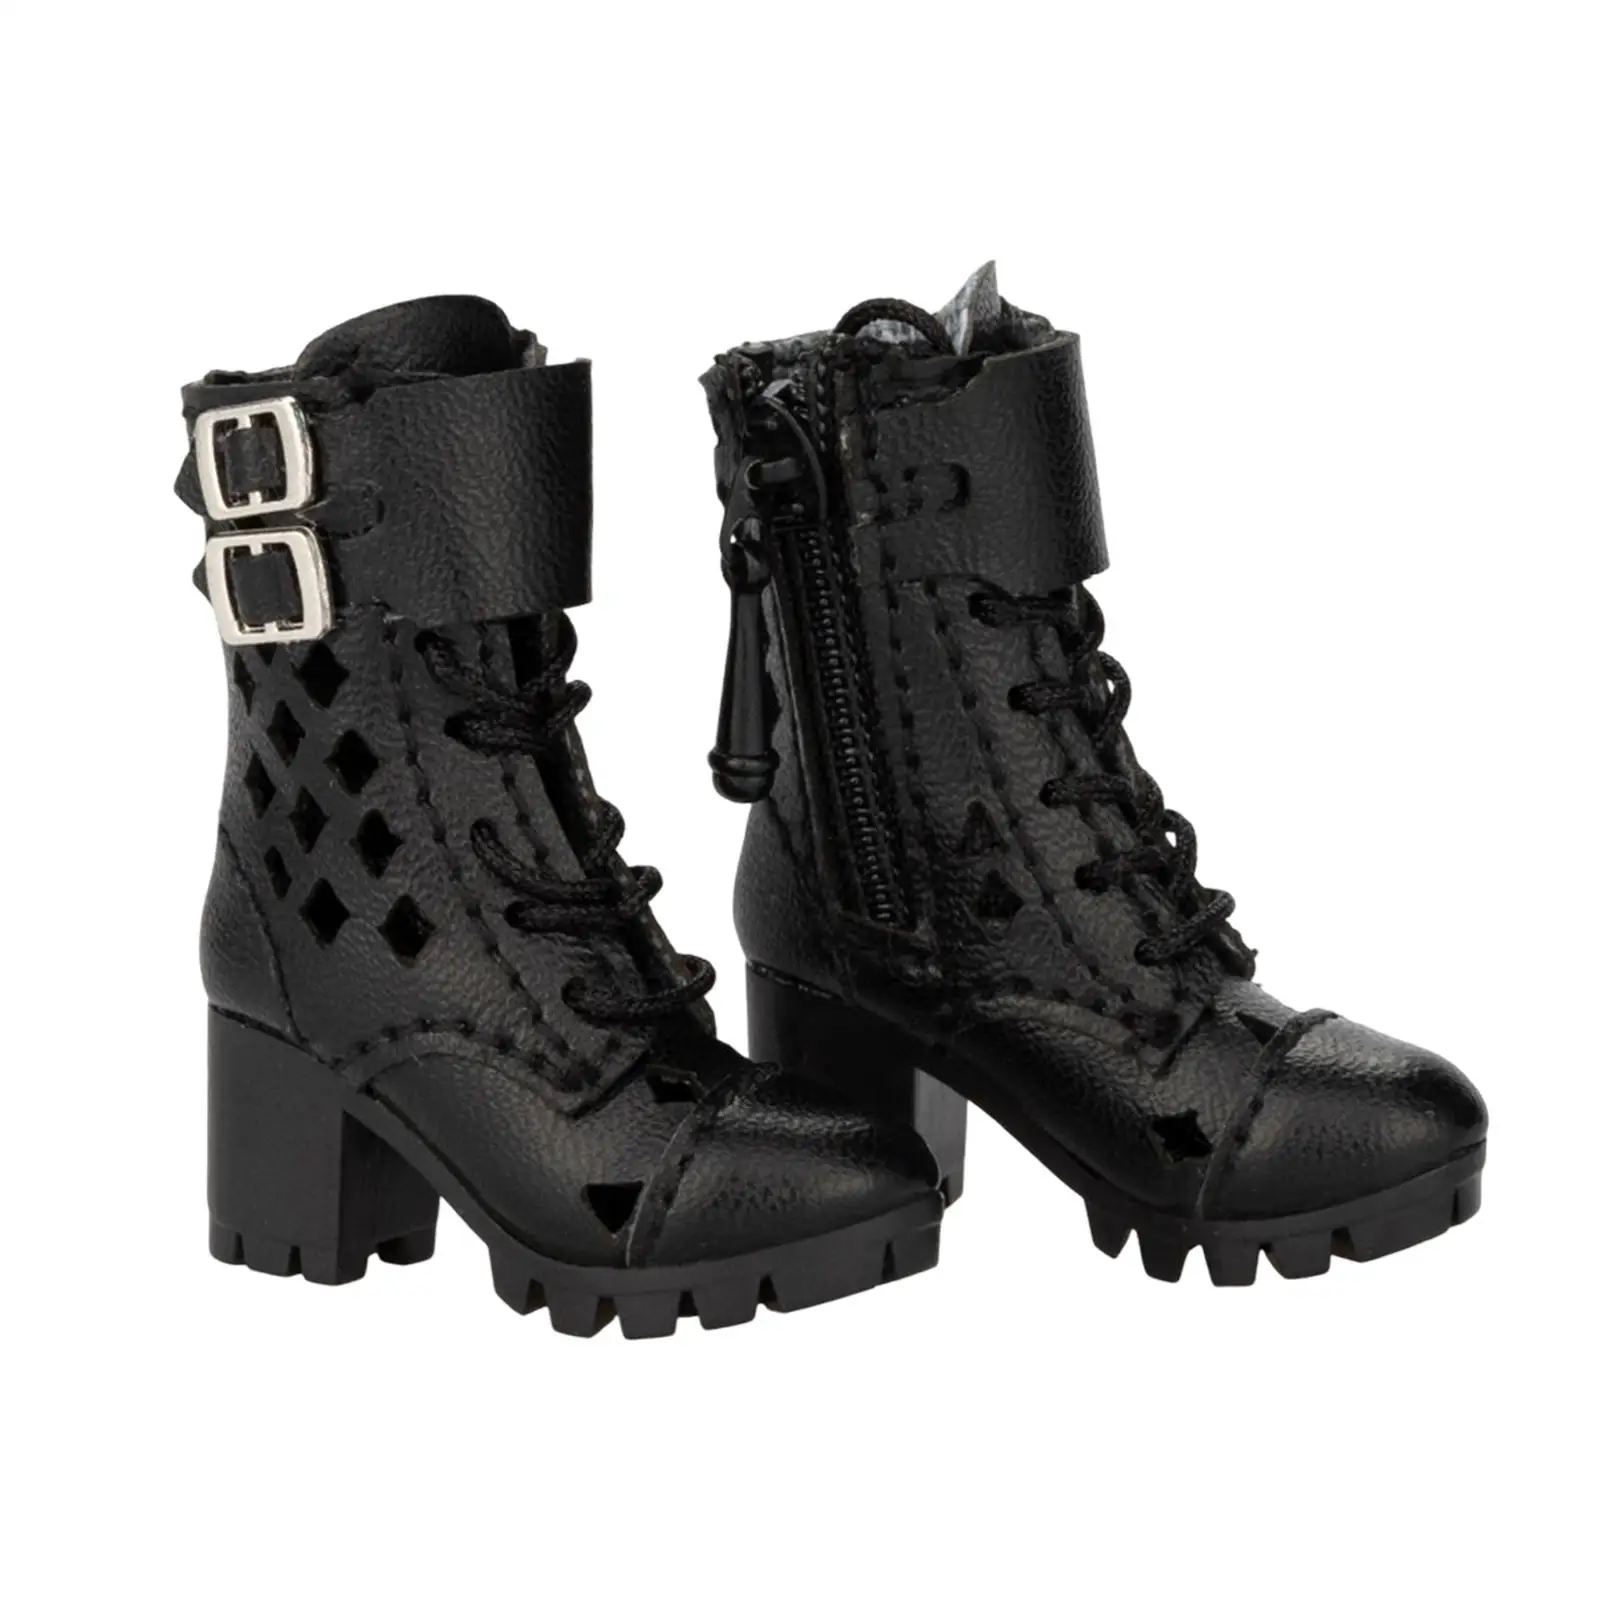 1/6 High Heeled Shoes Black Boot for 12